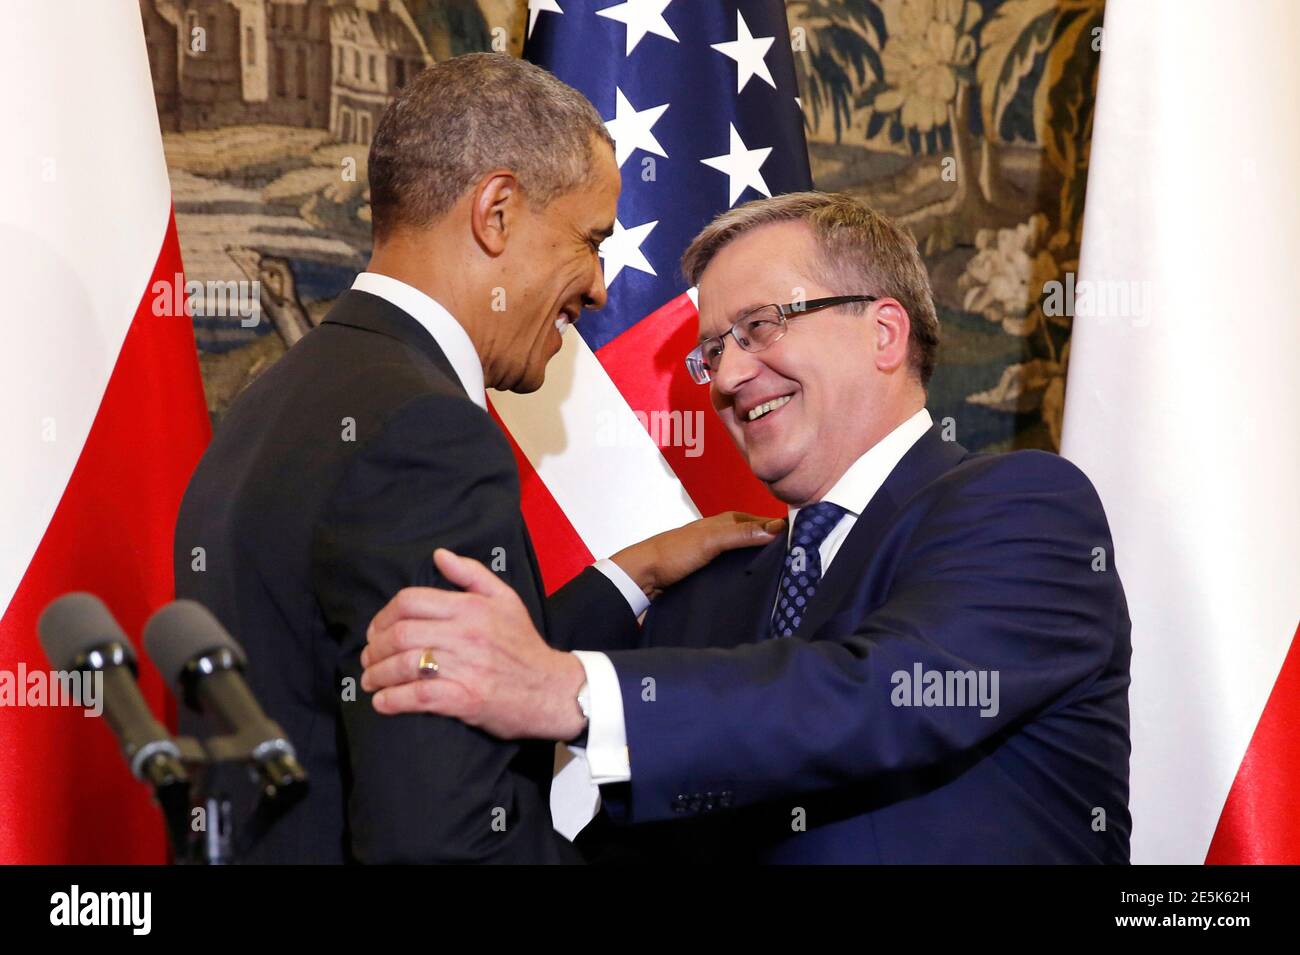 U.S. President Barack Obama hugs Poland's President Bronislaw Komorowski at the conclusion of a news conference at Belweder Palace in Warsaw June 3, 2014.  Obama is visiting Warsaw, Brussels, Paris and Normandy this week where he is expected to elaborate on the U.S. commitment to counter Russian moves against Ukraine and reassure nervous allies the United States has their backs. REUTERS/Kevin Lamarque  (POLAND - Tags: POLITICS) Stock Photo